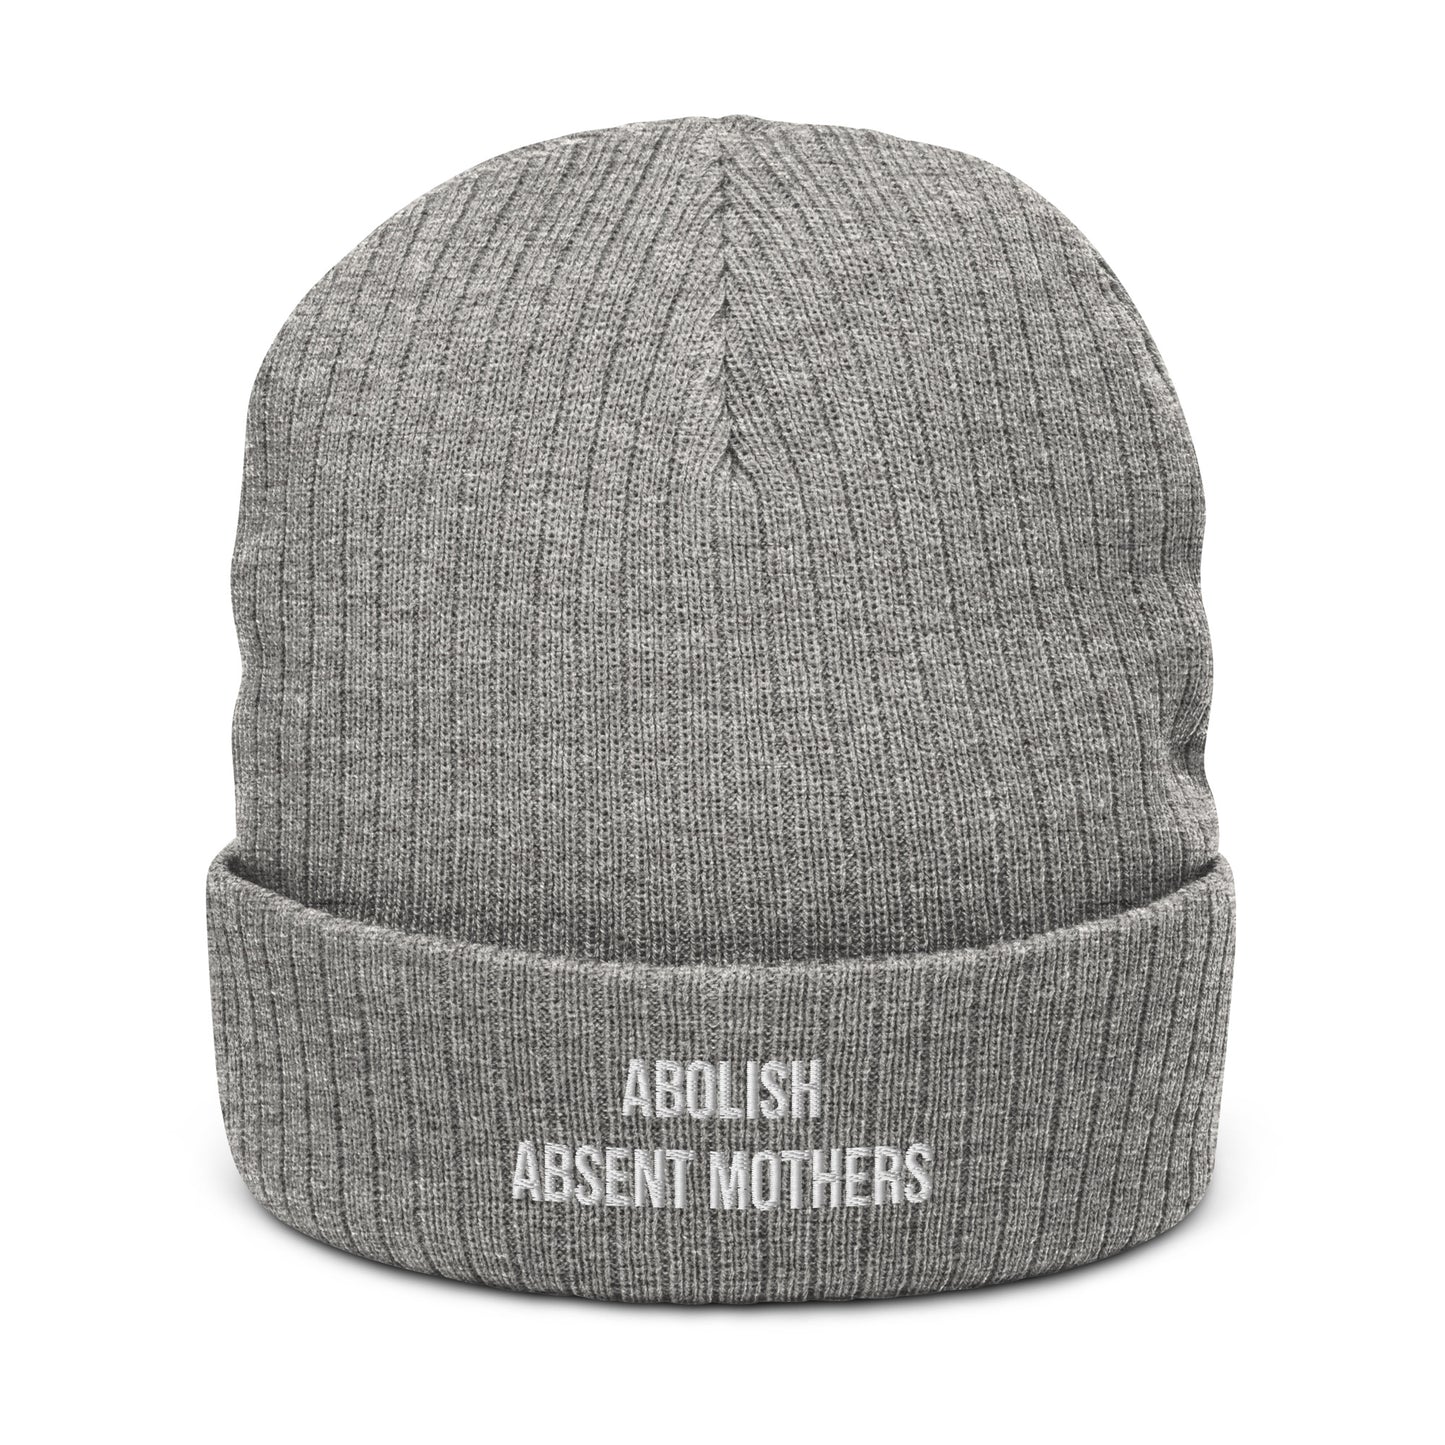 Abolish Absent Mothers Embroidered Beanie